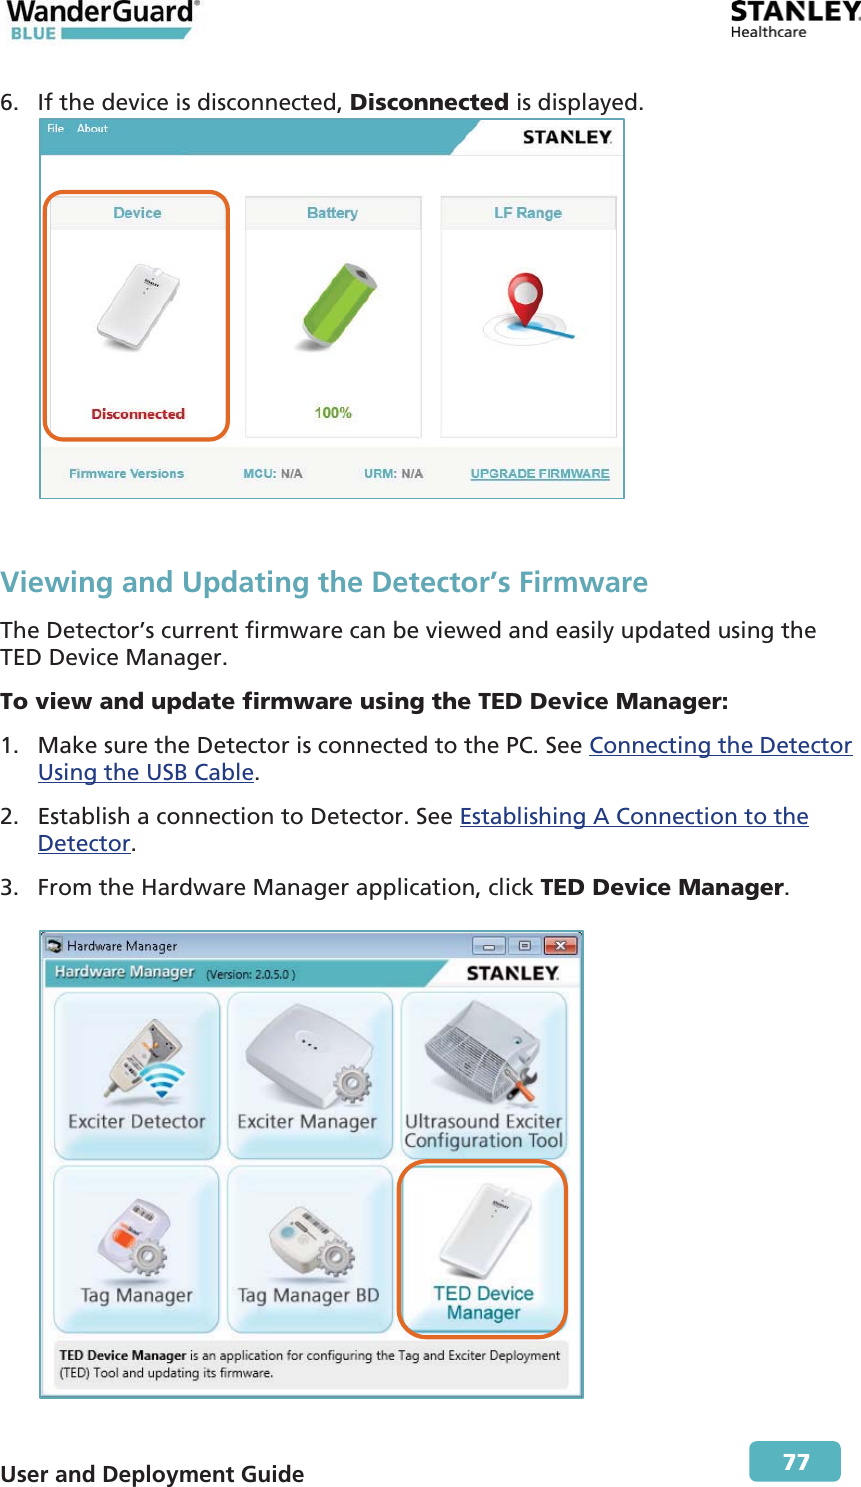  User and Deployment Guide        77 6. If the device is disconnected, Disconnected is displayed.   Viewing and Updating the Detector’s Firmware The Detector’s current firmware can be viewed and easily updated using the TED Device Manager. To view and update firmware using the TED Device Manager: 1. Make sure the Detector is connected to the PC. See Connecting the Detector Using the USB Cable. 2. Establish a connection to Detector. See Establishing A Connection to the Detector. 3. From the Hardware Manager application, click TED Device Manager.    